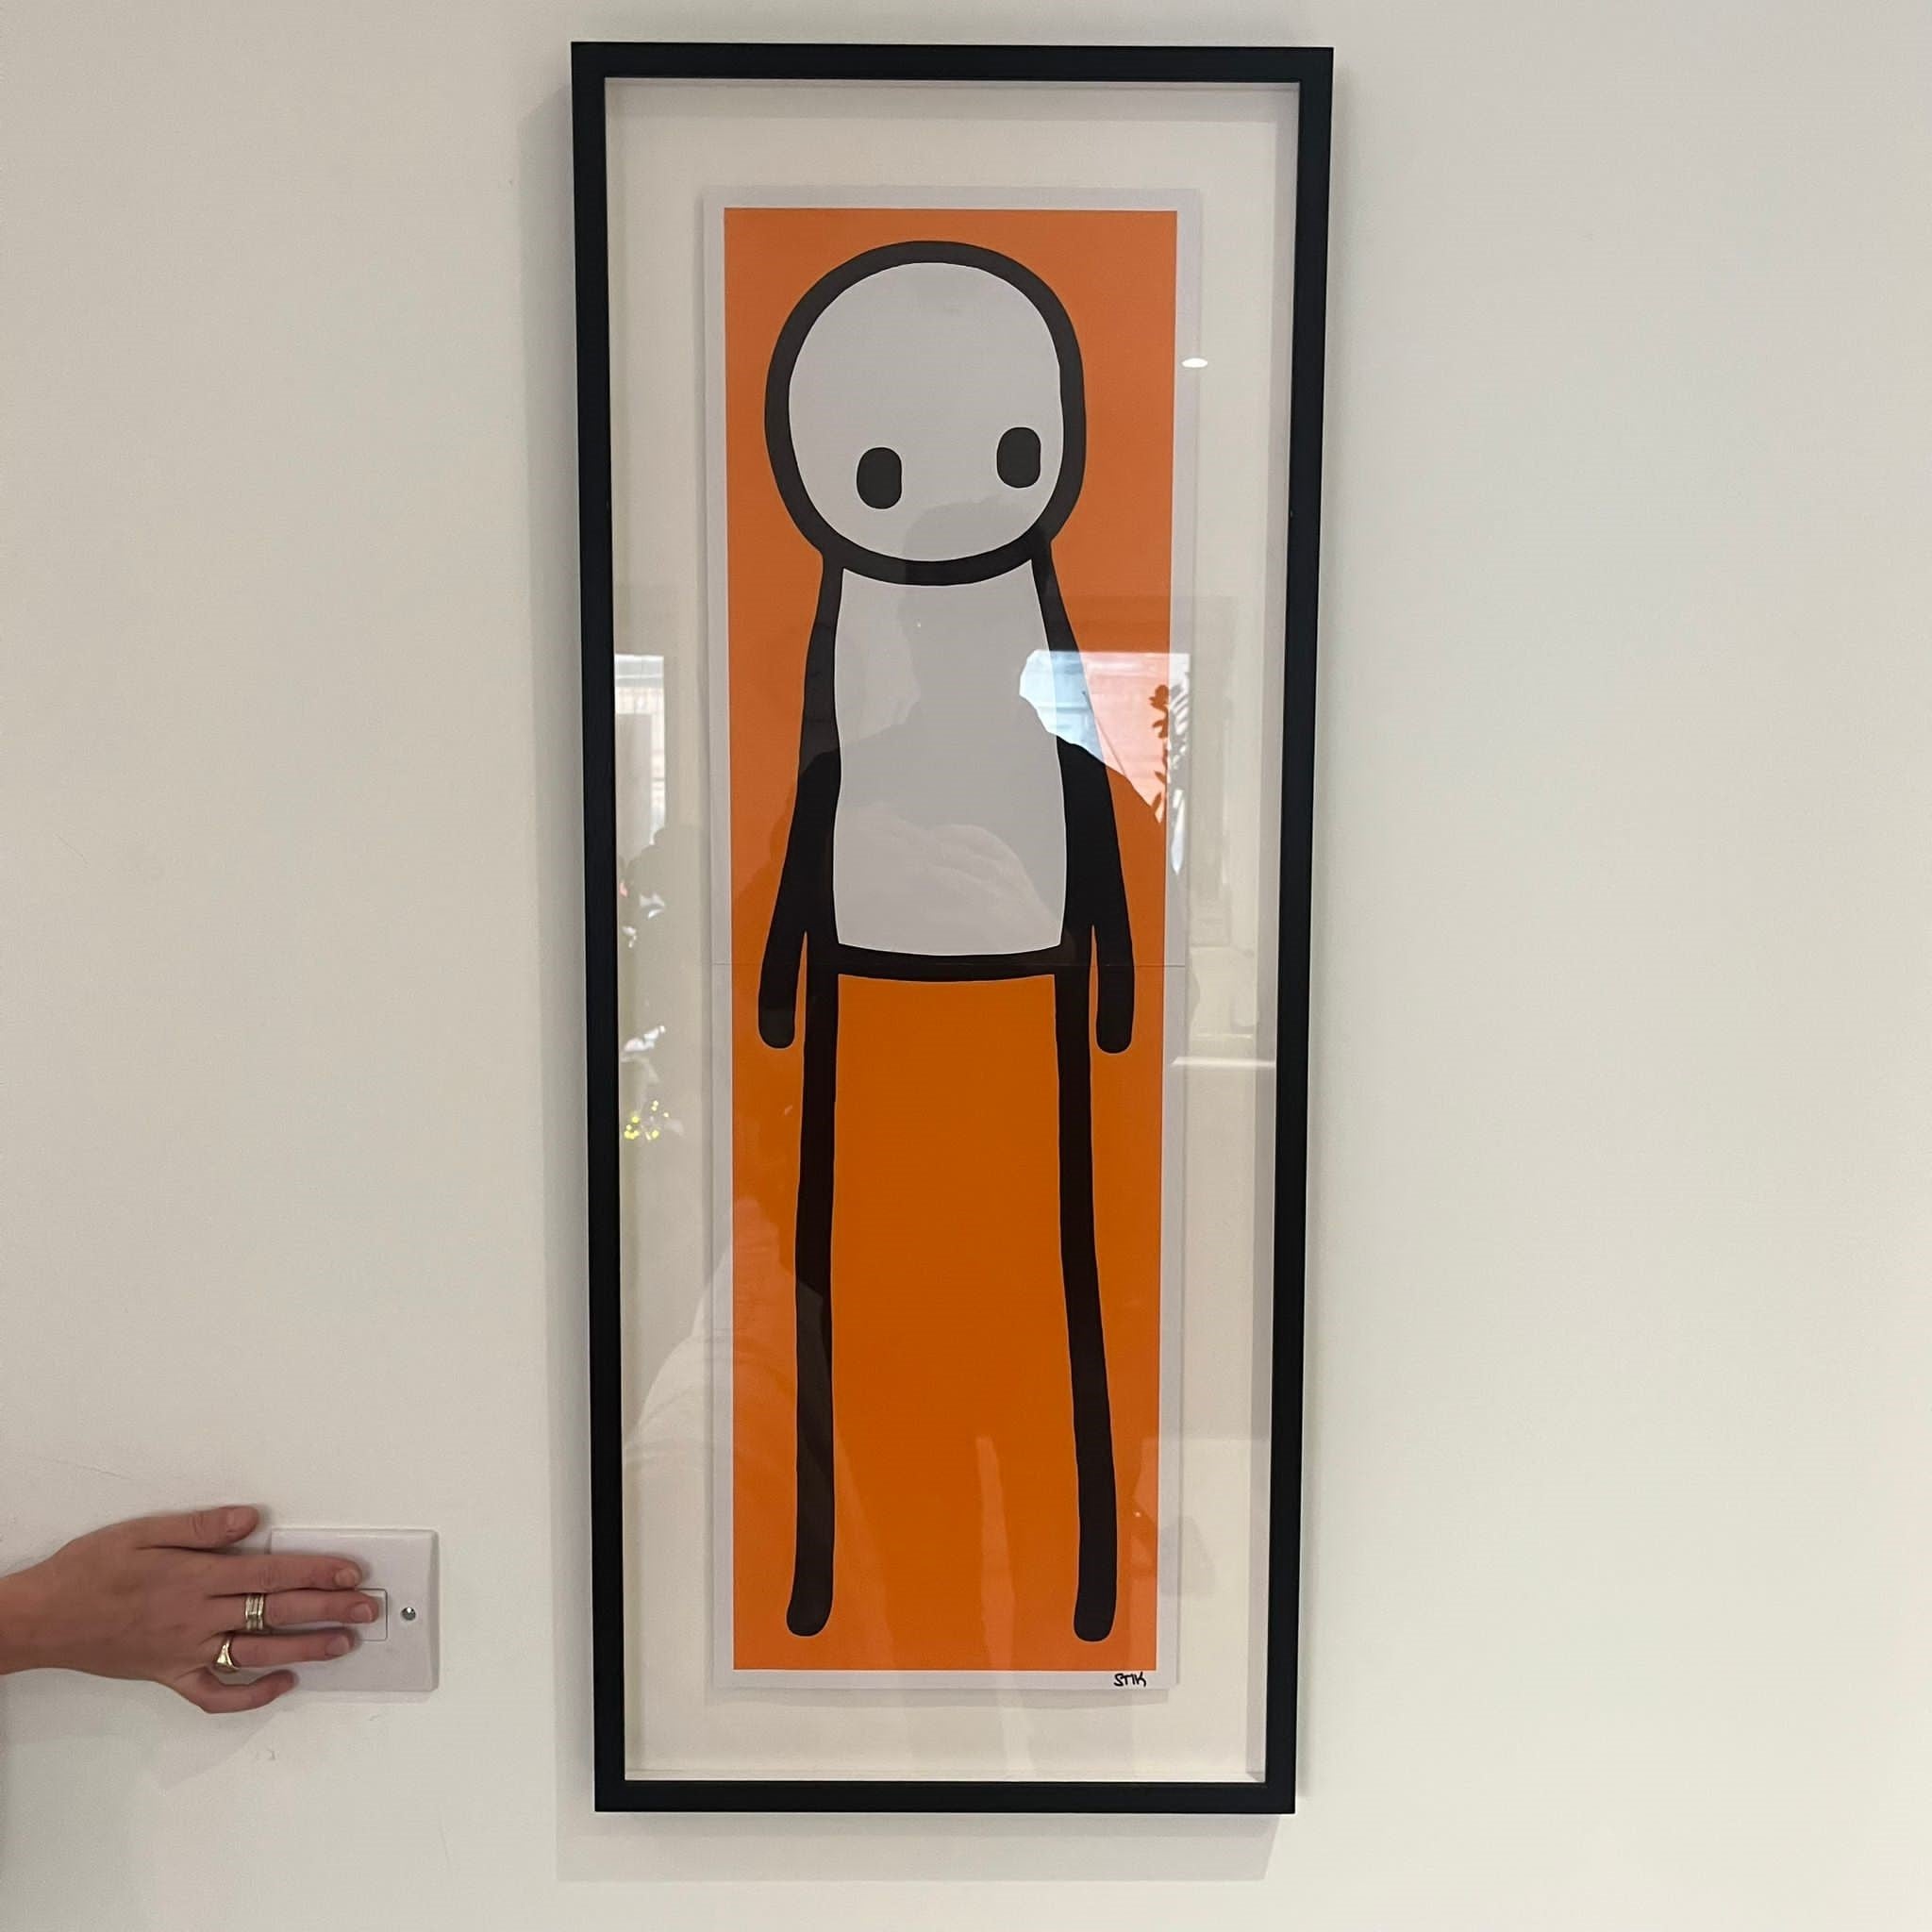 Stik - Standing Figure (Signed Lithograph 2015)